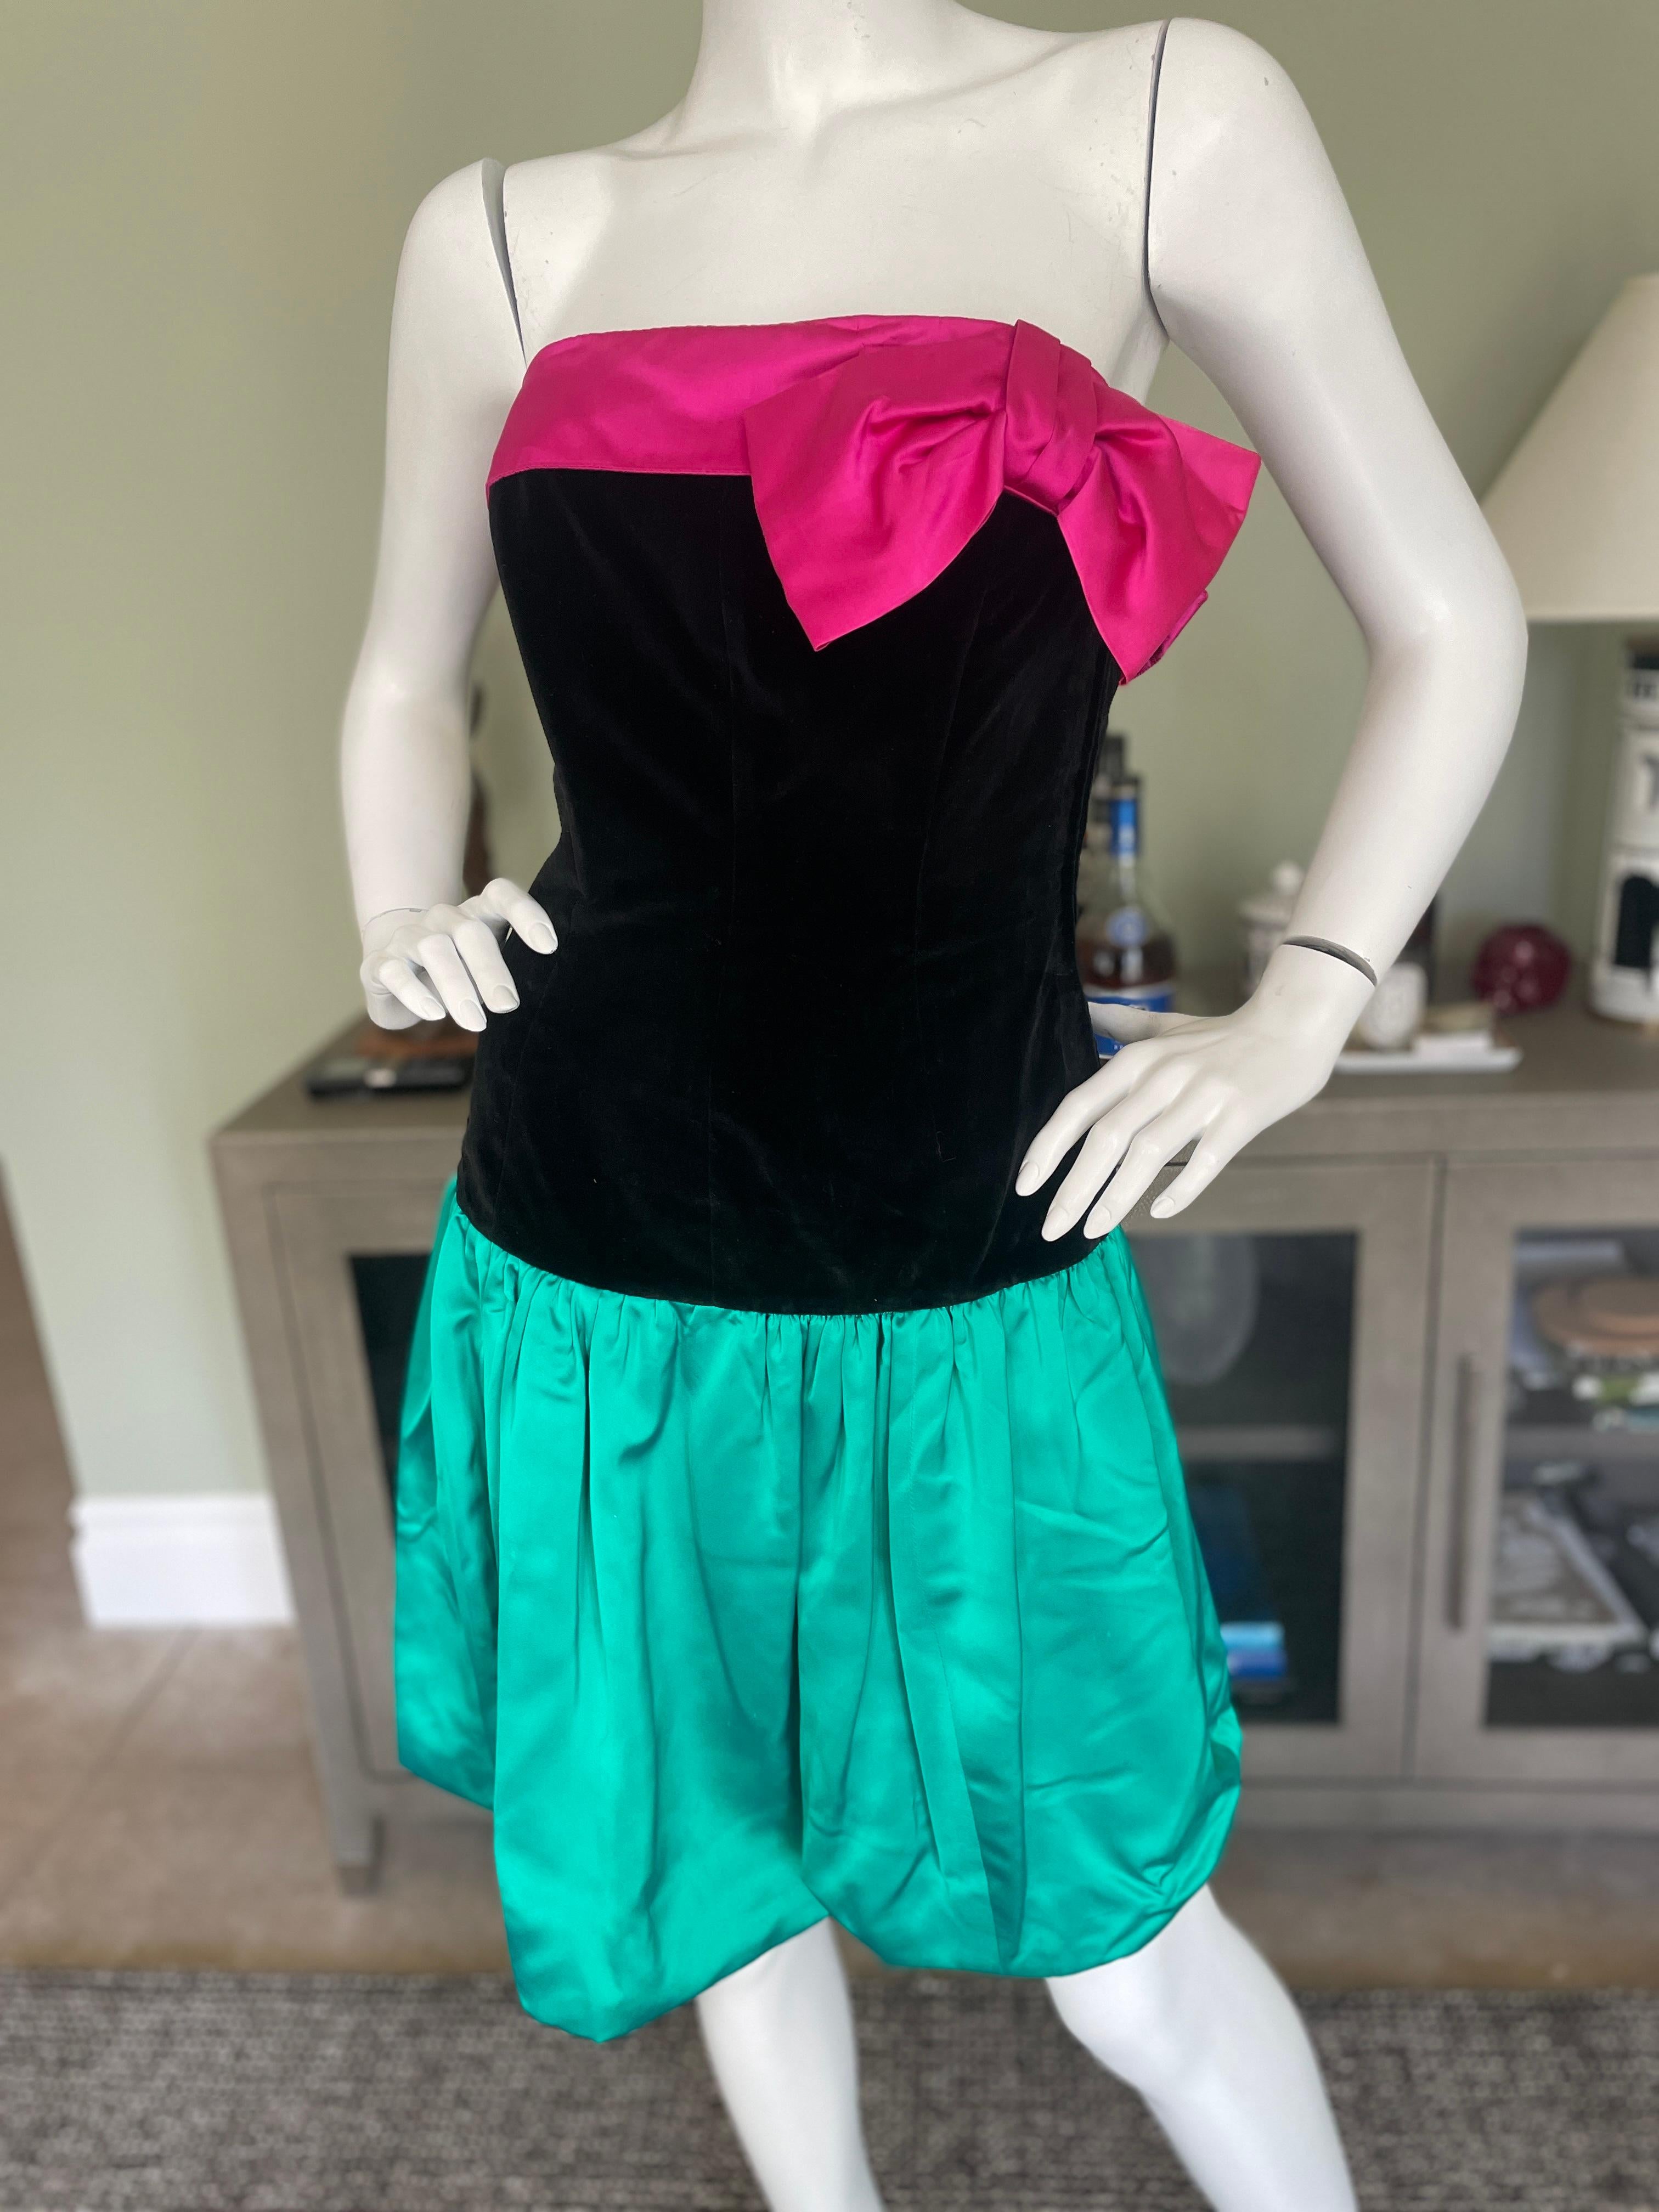 Yves Saint Laurent Rive Gauche 1980's Velvet Colorblock Cocktail Dress with Bow In Excellent Condition For Sale In Cloverdale, CA